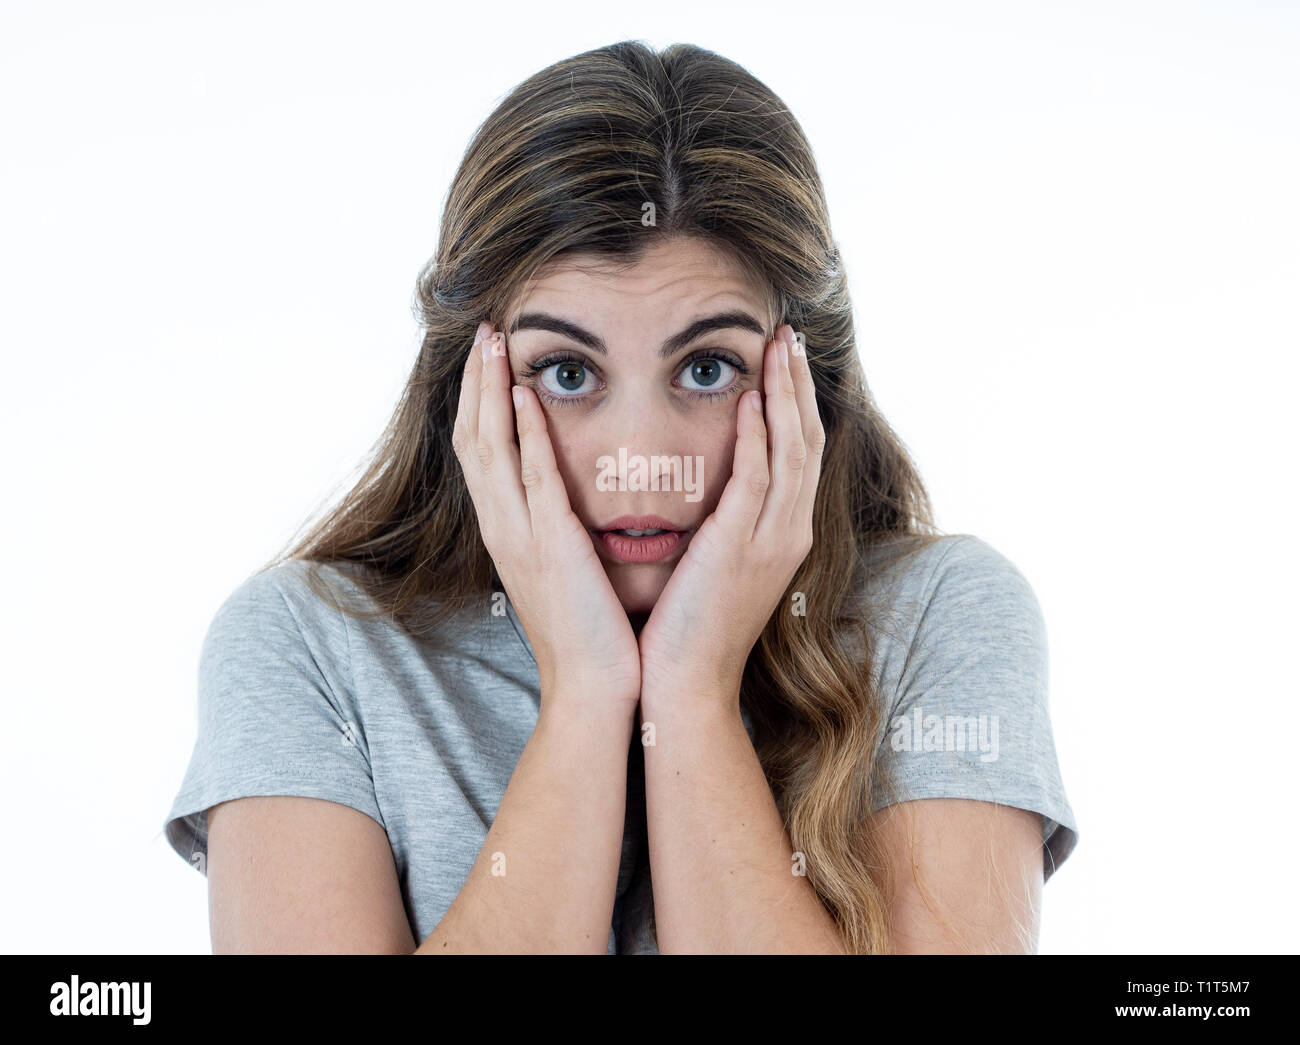 Close up portrait of young woman feeling afraid and shocked hiding her face from something scary. Looking with fear in her eyes. People and Human expr Stock Photo